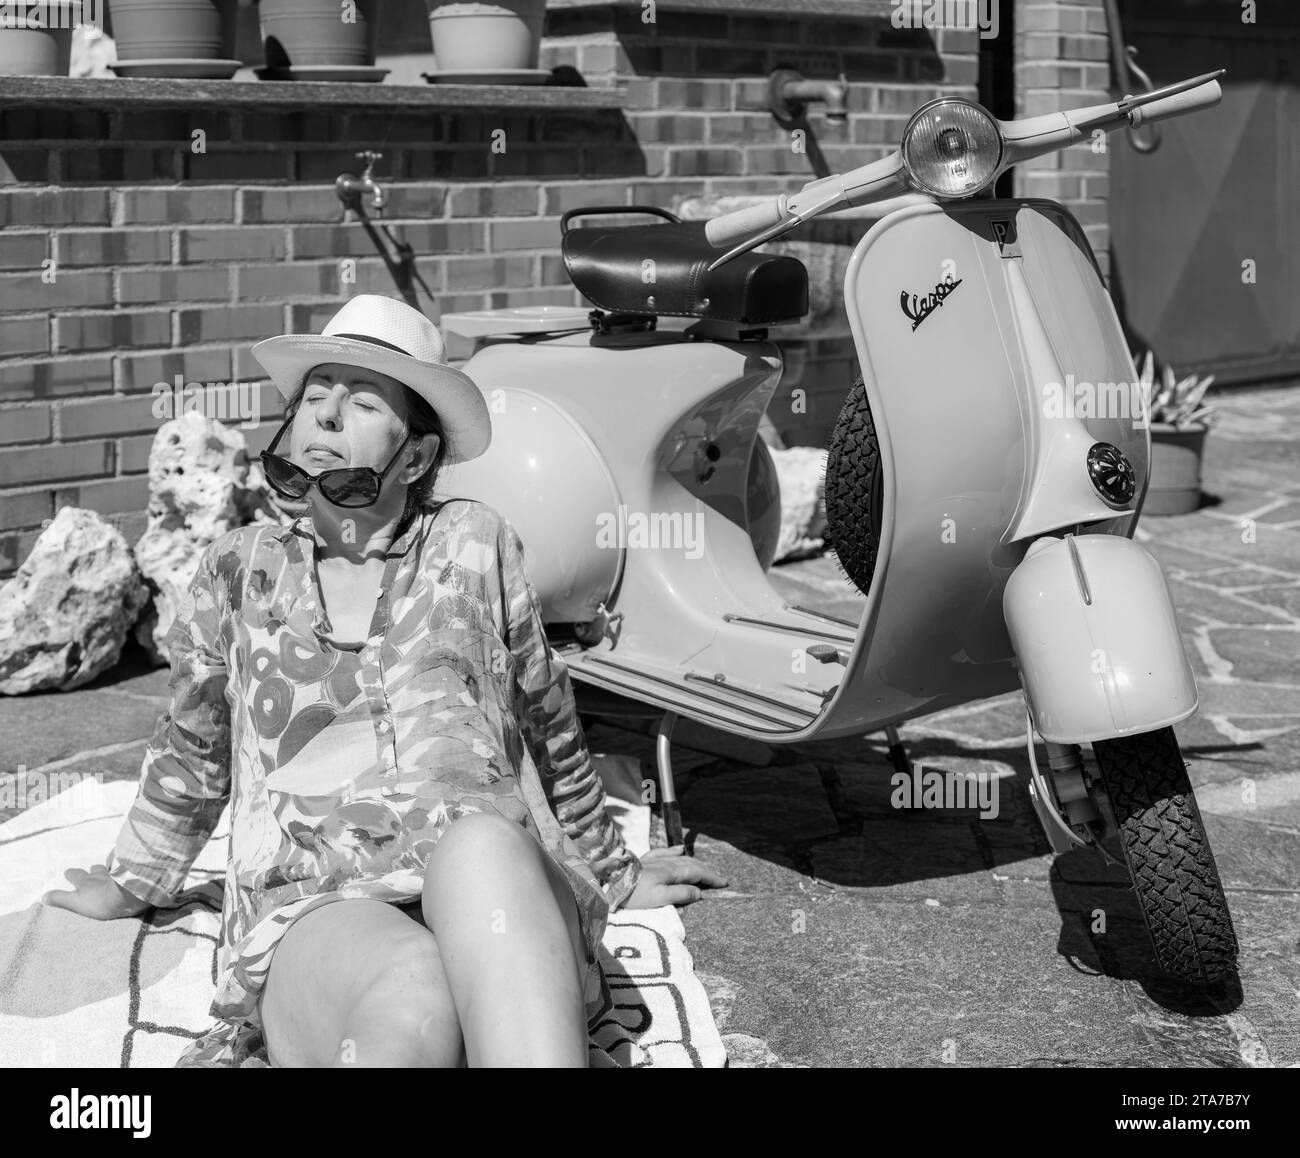 Close-up of a young lady sunbathing next to a 1960s Piaggio Vespa motorcycle Stock Photo